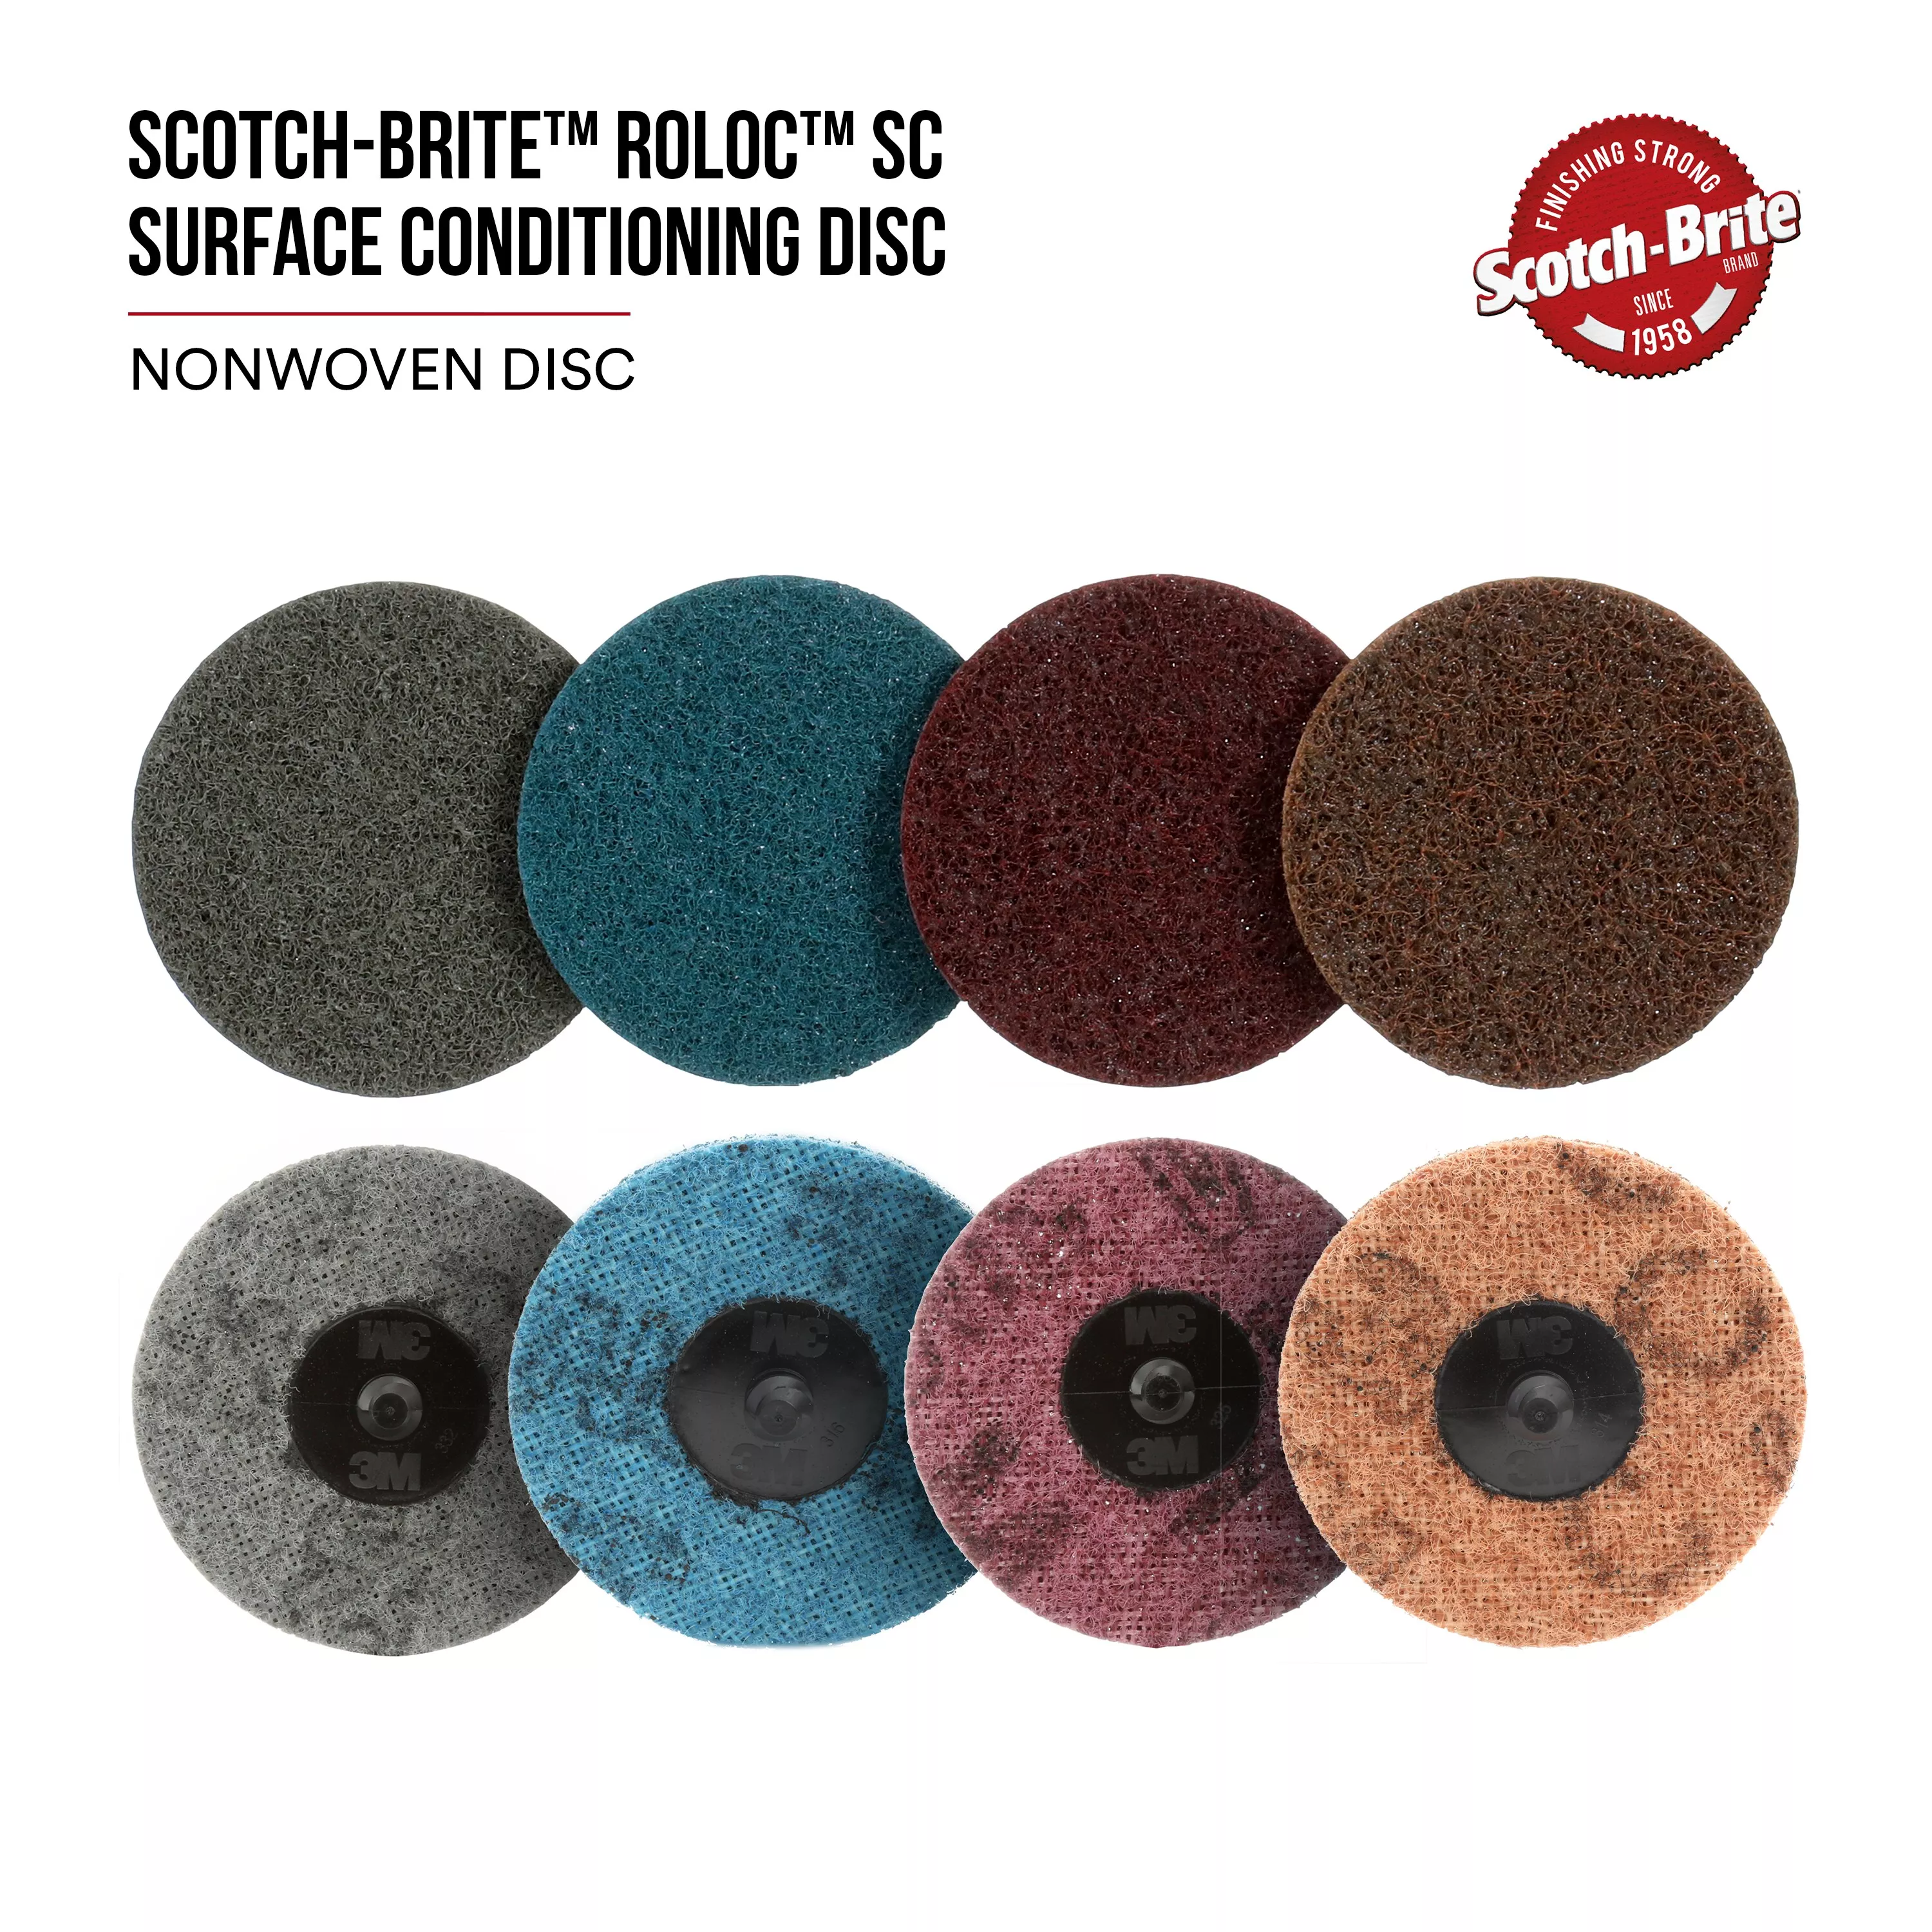 Product Number SC-DR | Scotch-Brite™ Roloc™ Surface Conditioning Disc